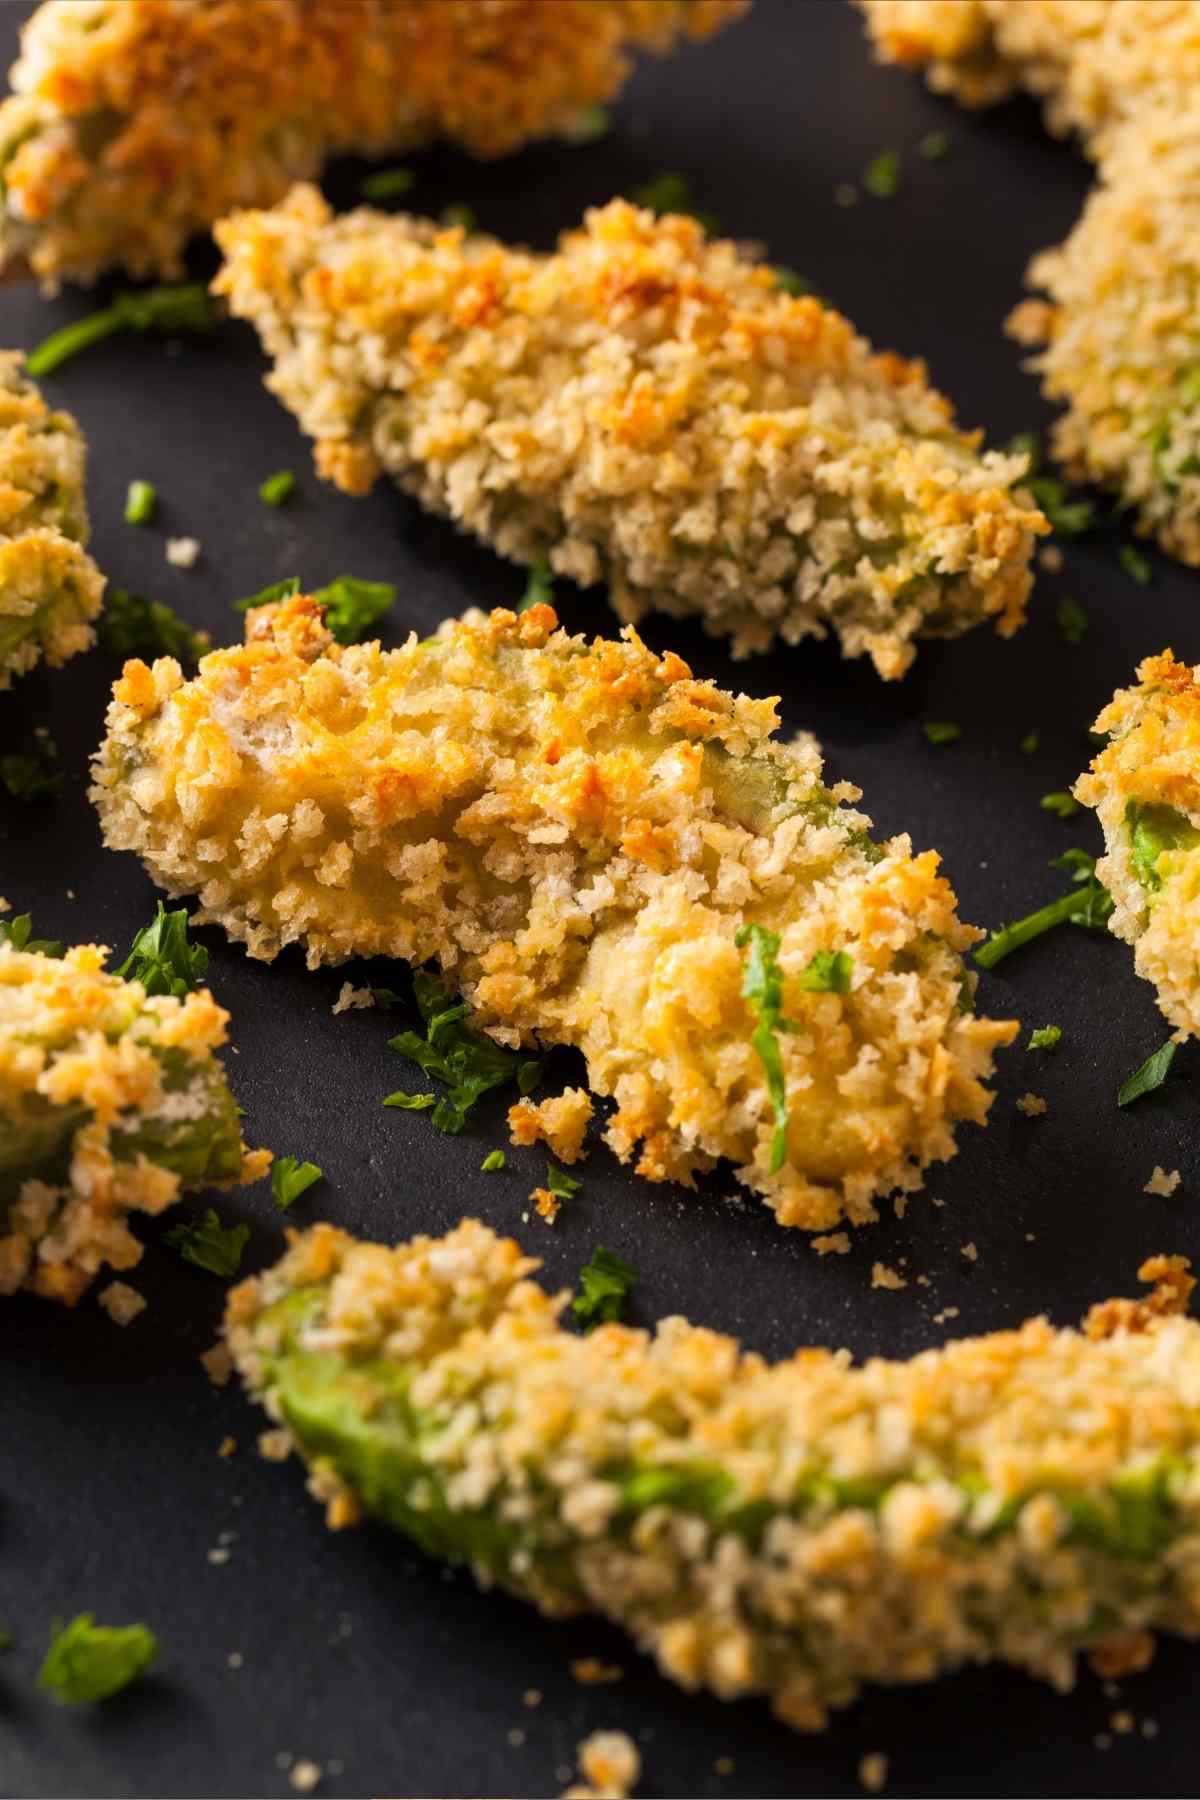 If you think avocado can only be enjoyed in salads, tacos, or as guacamole, you’re in for a treat. This recipe for fried avocado is the perfect party food.